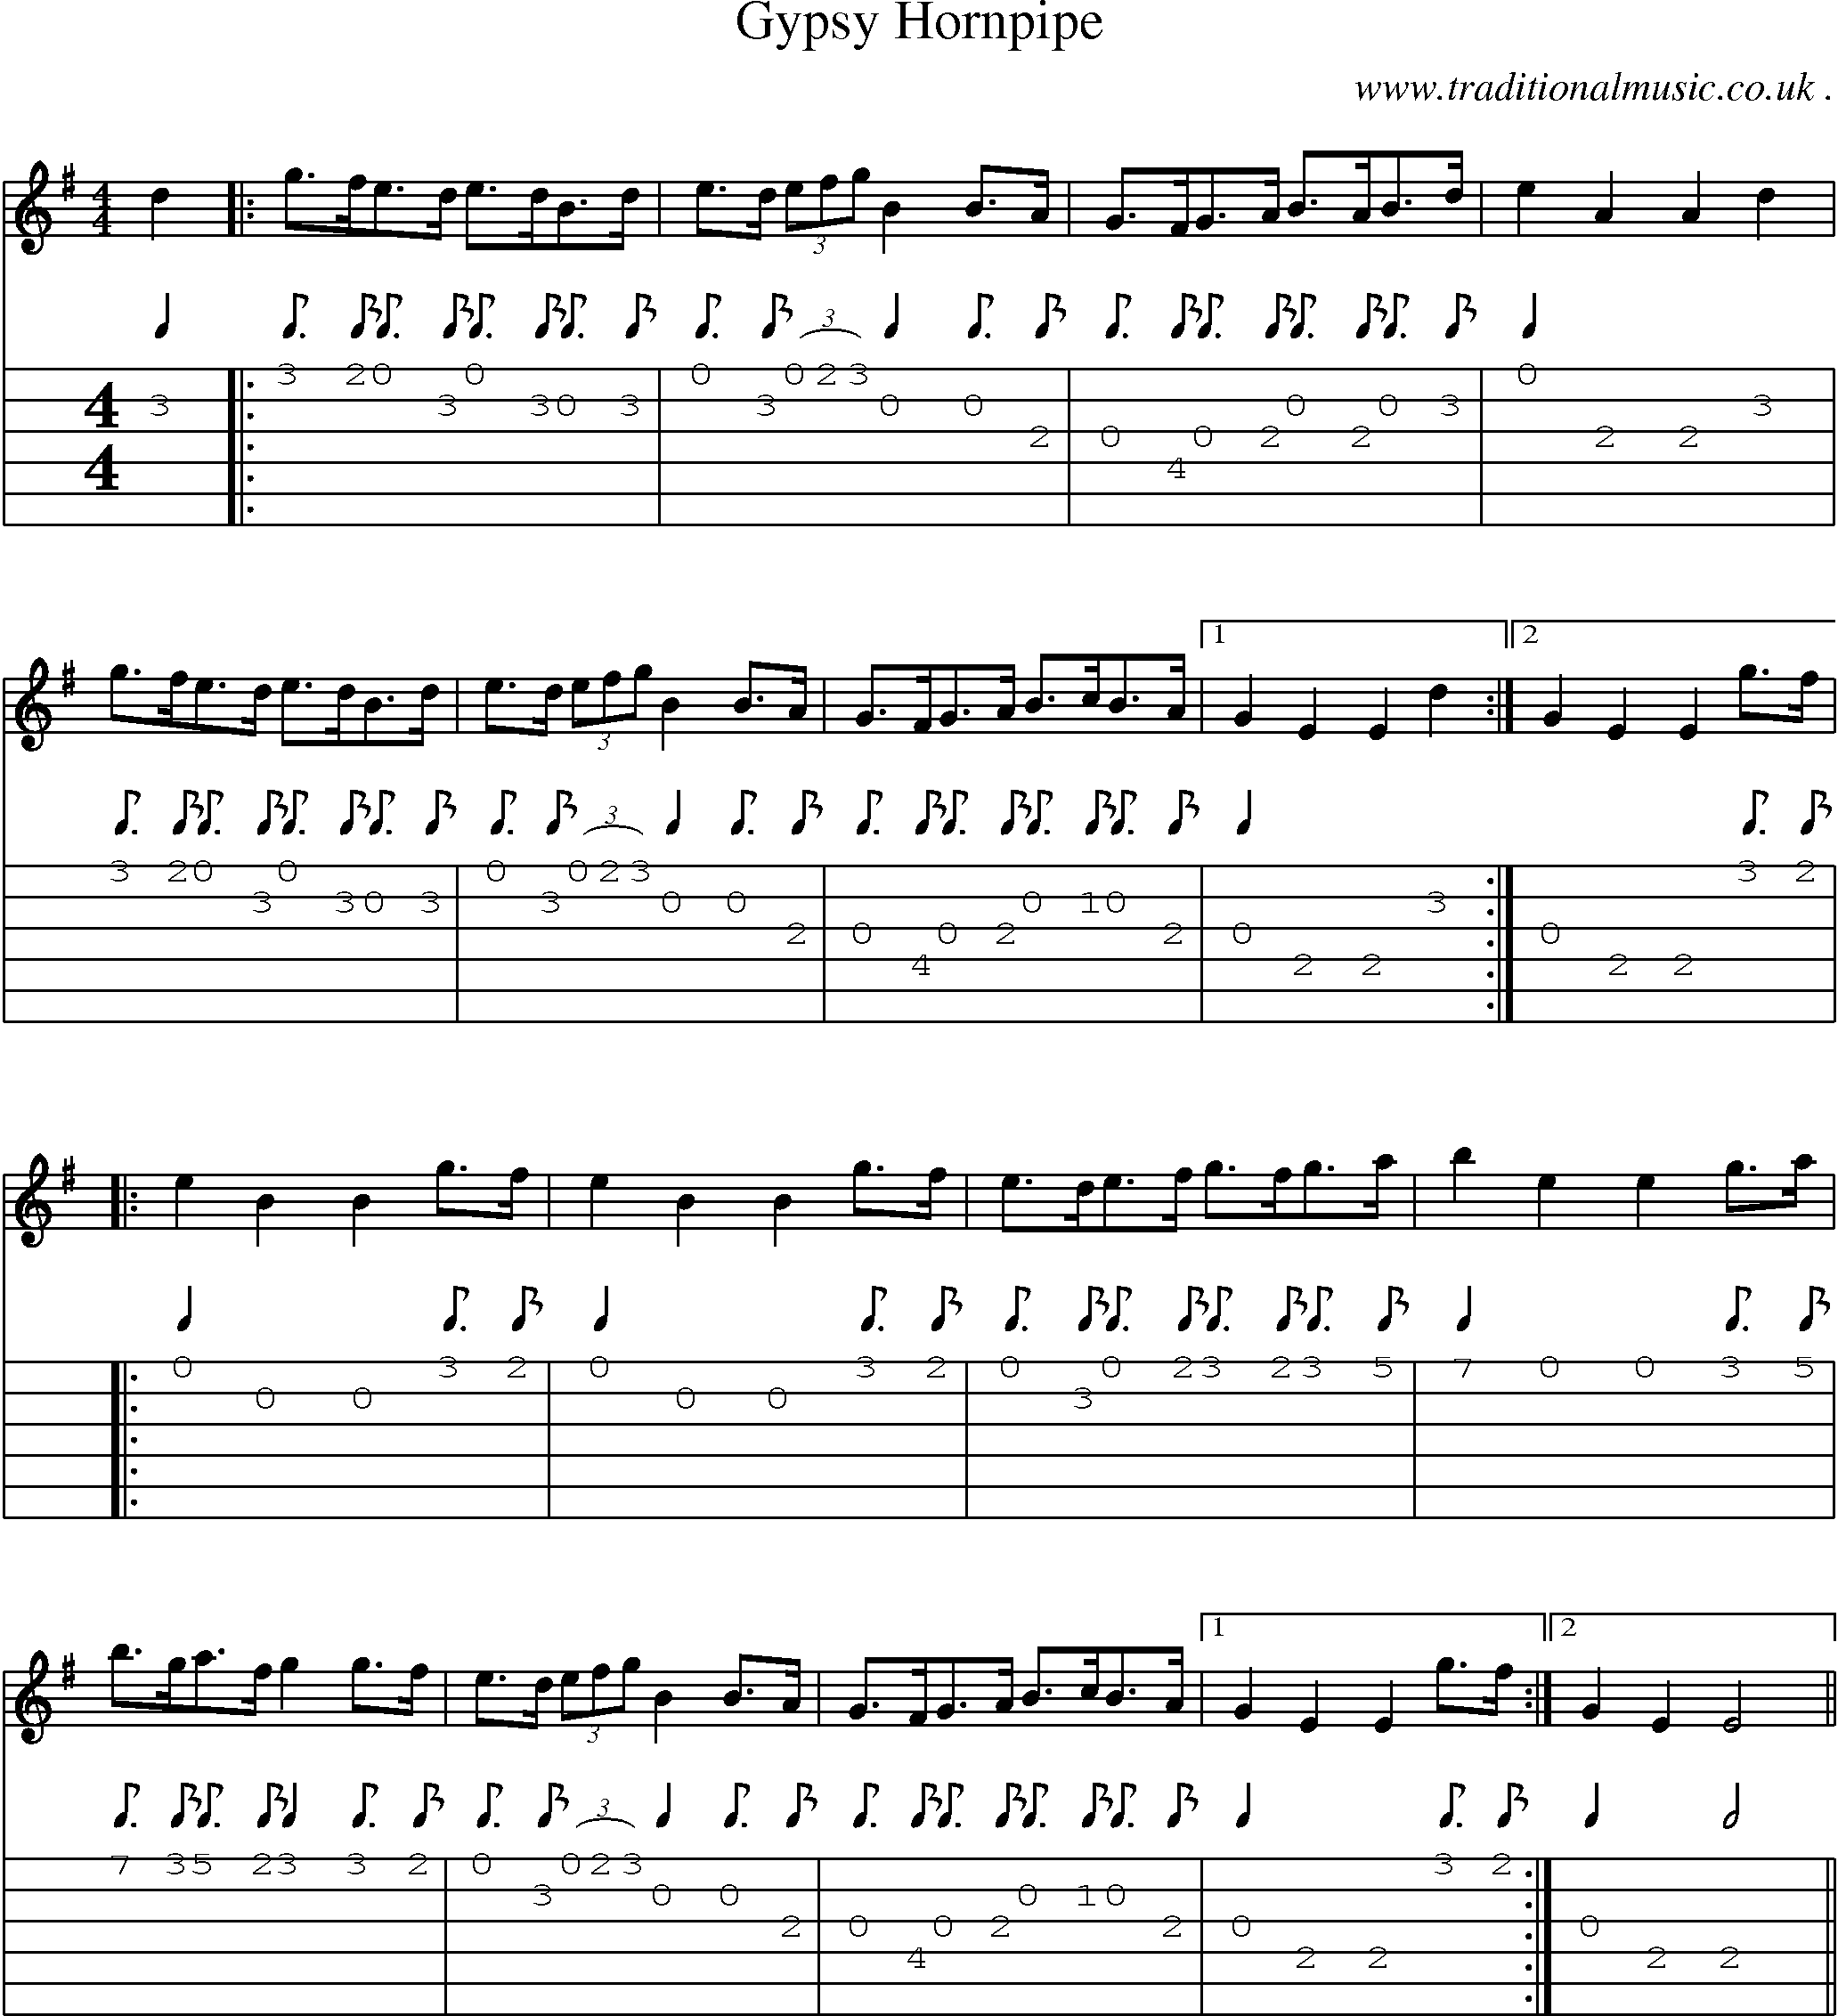 Sheet-Music and Guitar Tabs for Gypsy Hornpipe